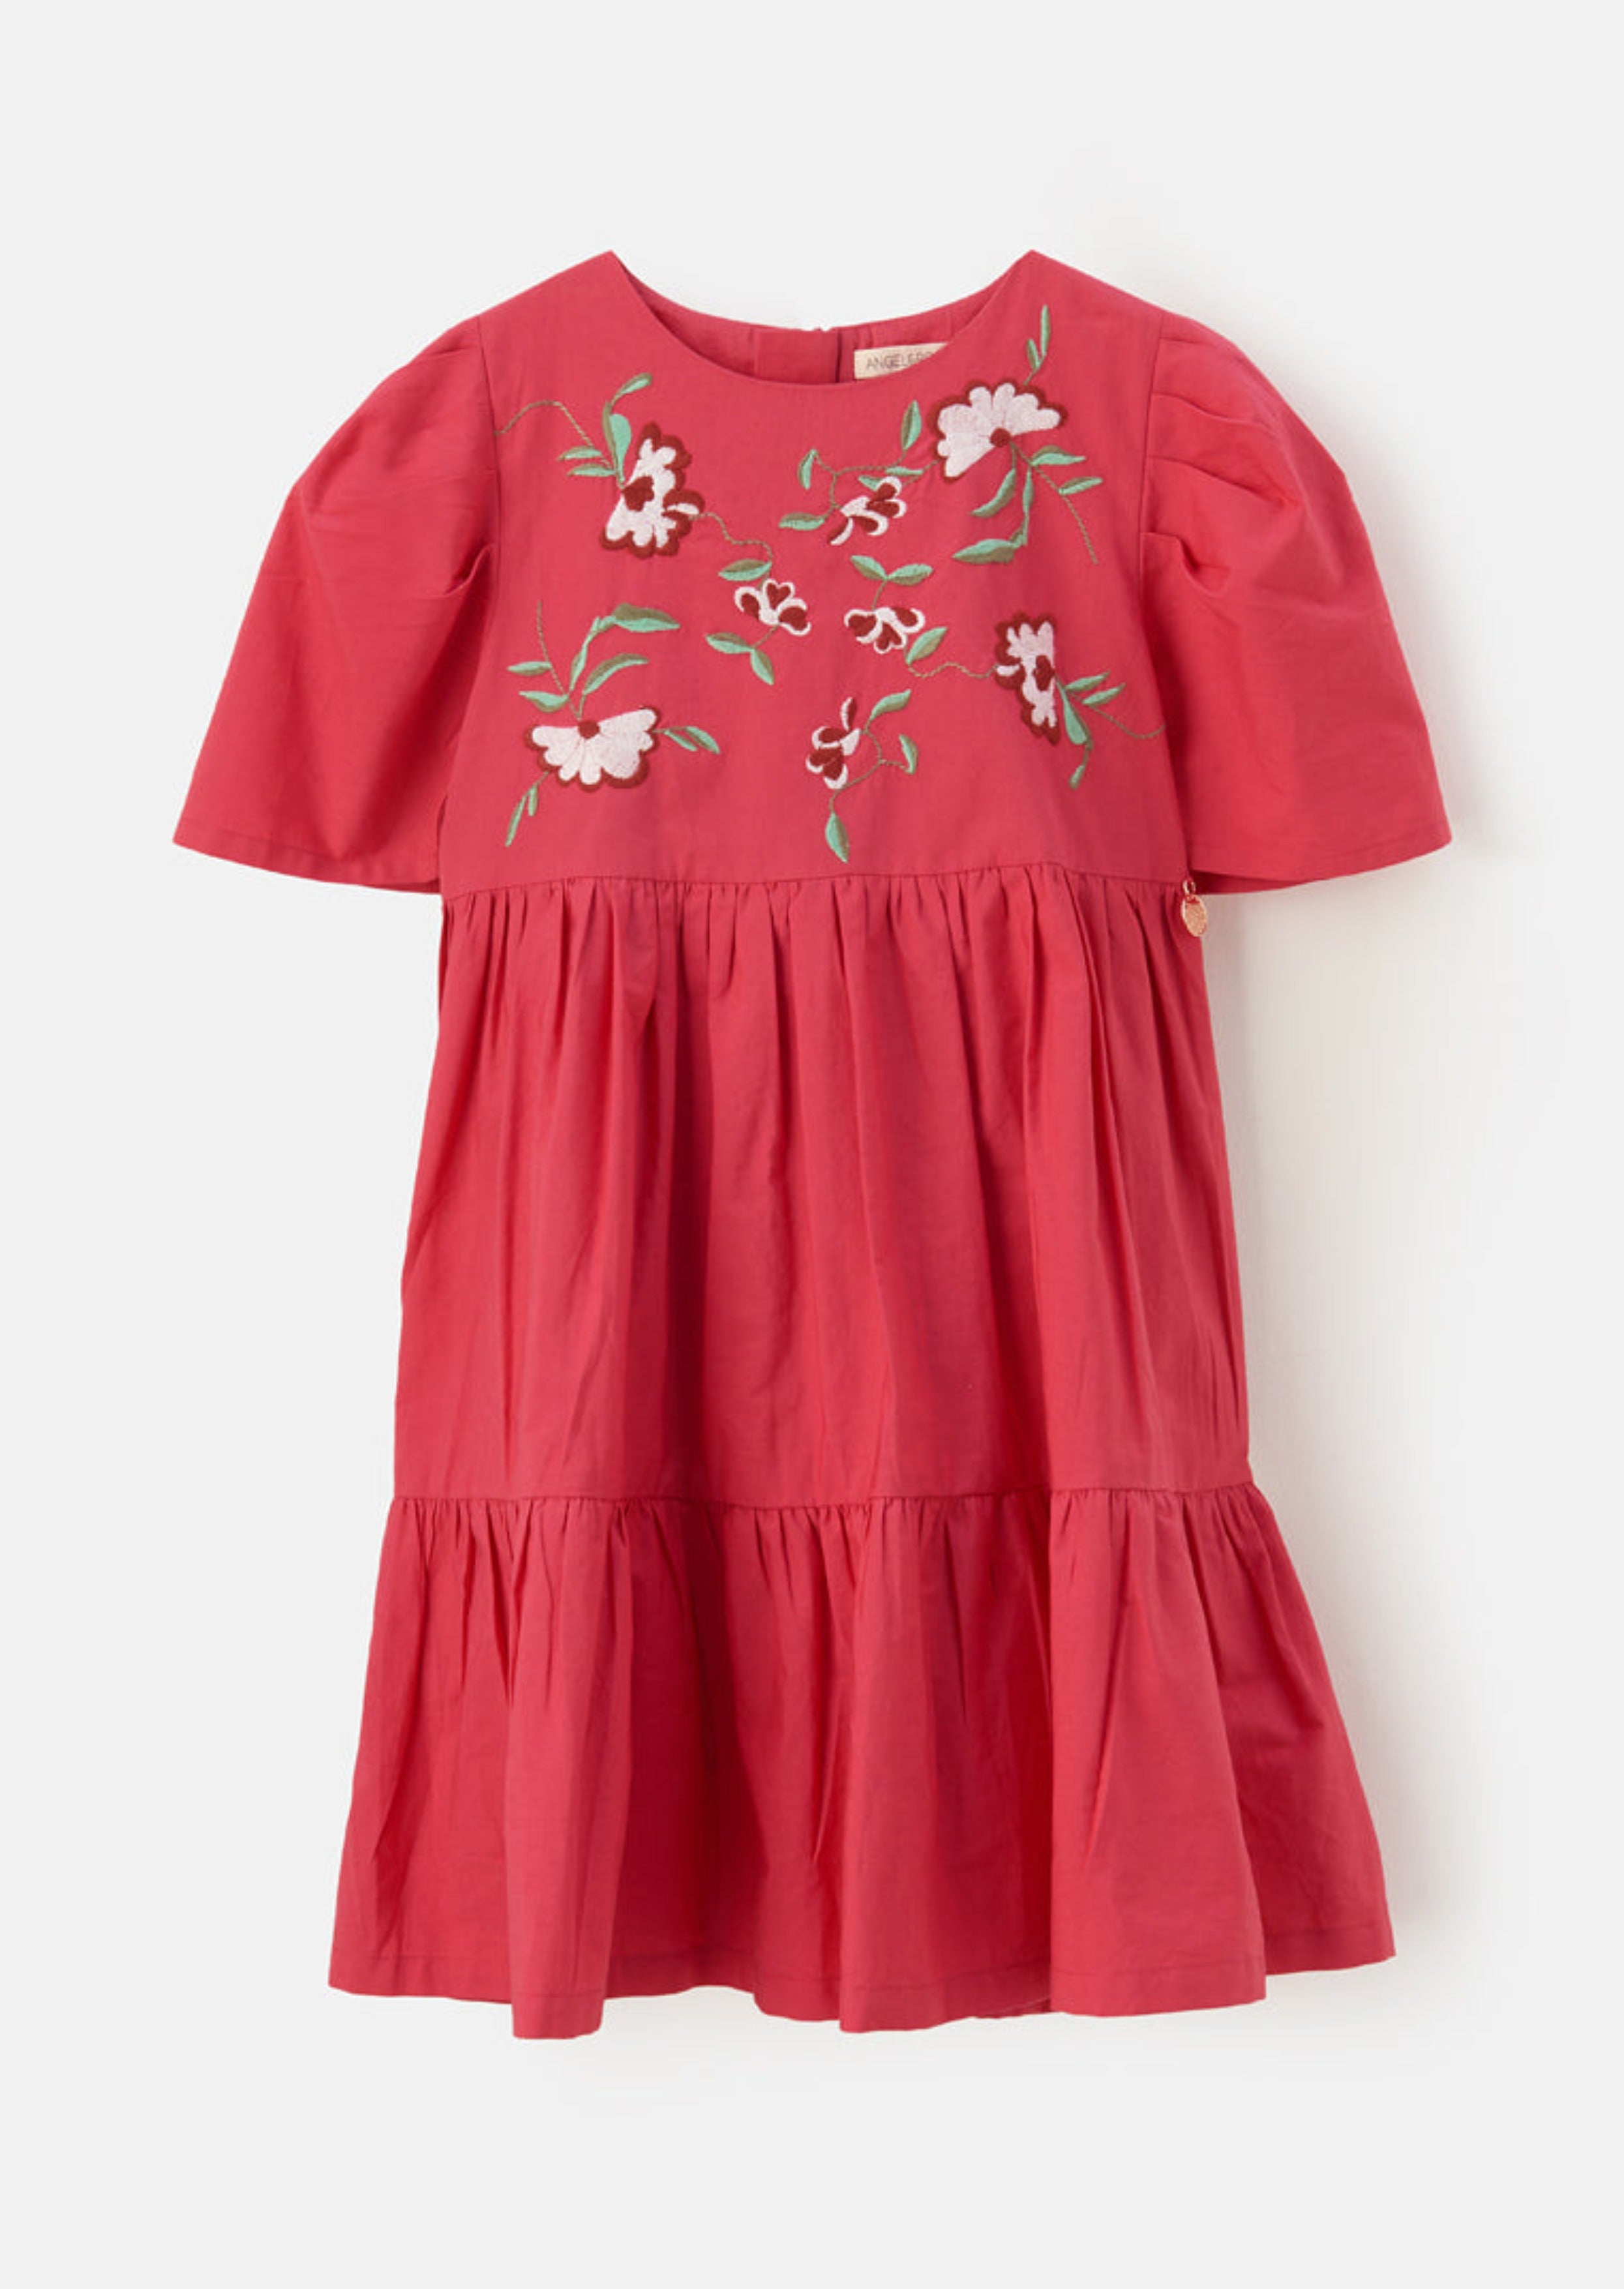 Girls Floral Embroidered Cotton Pink Dress with Puff Sleeves